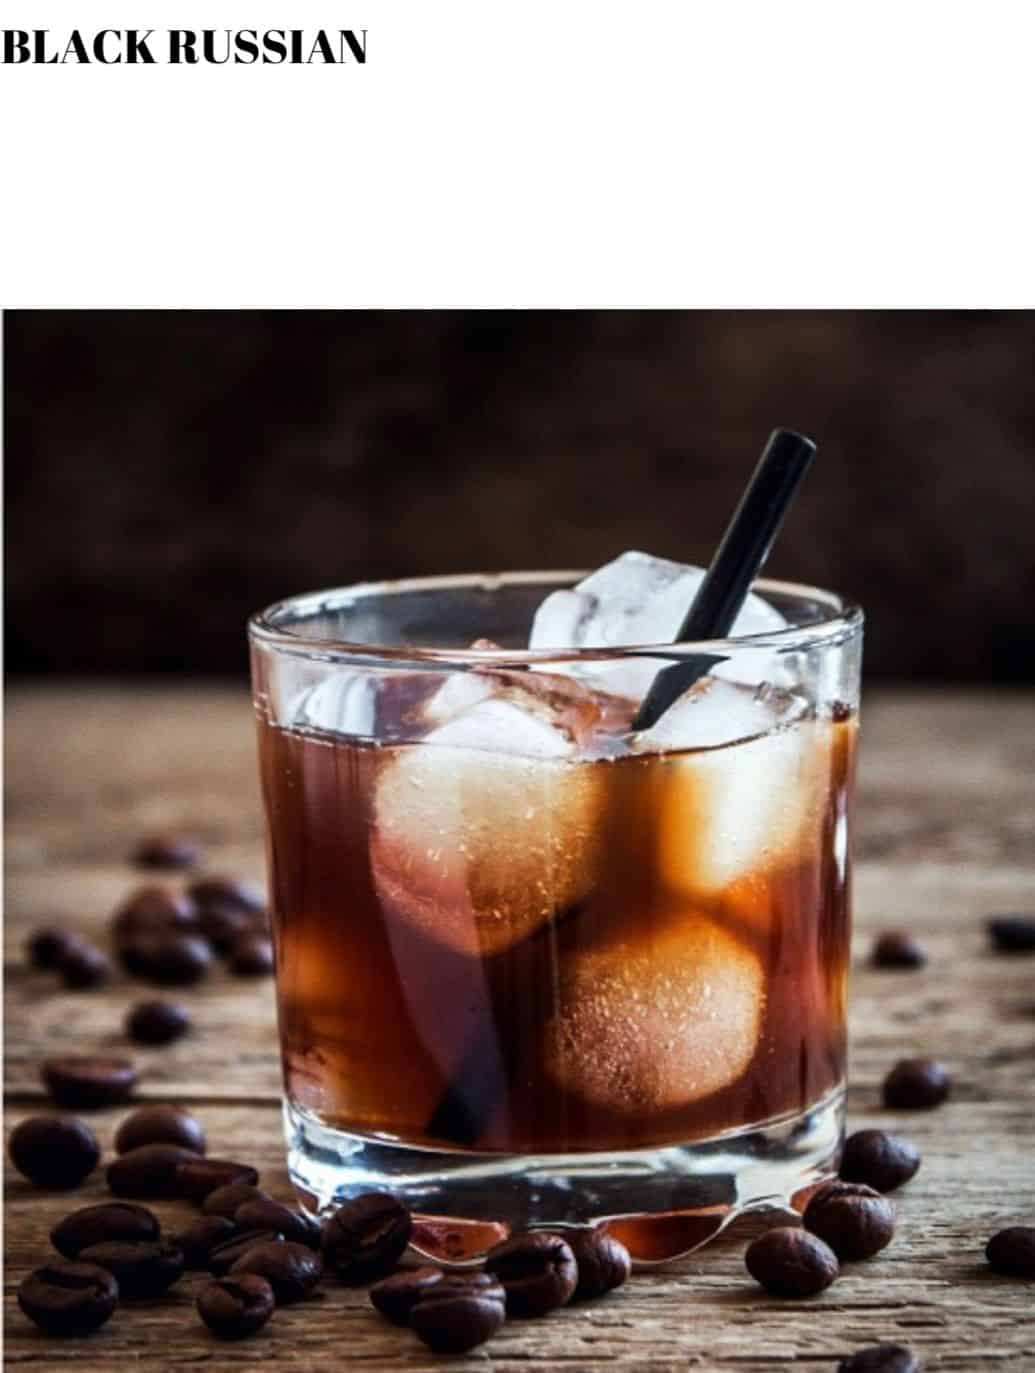 Black russian coffee with ice and coffee beans.